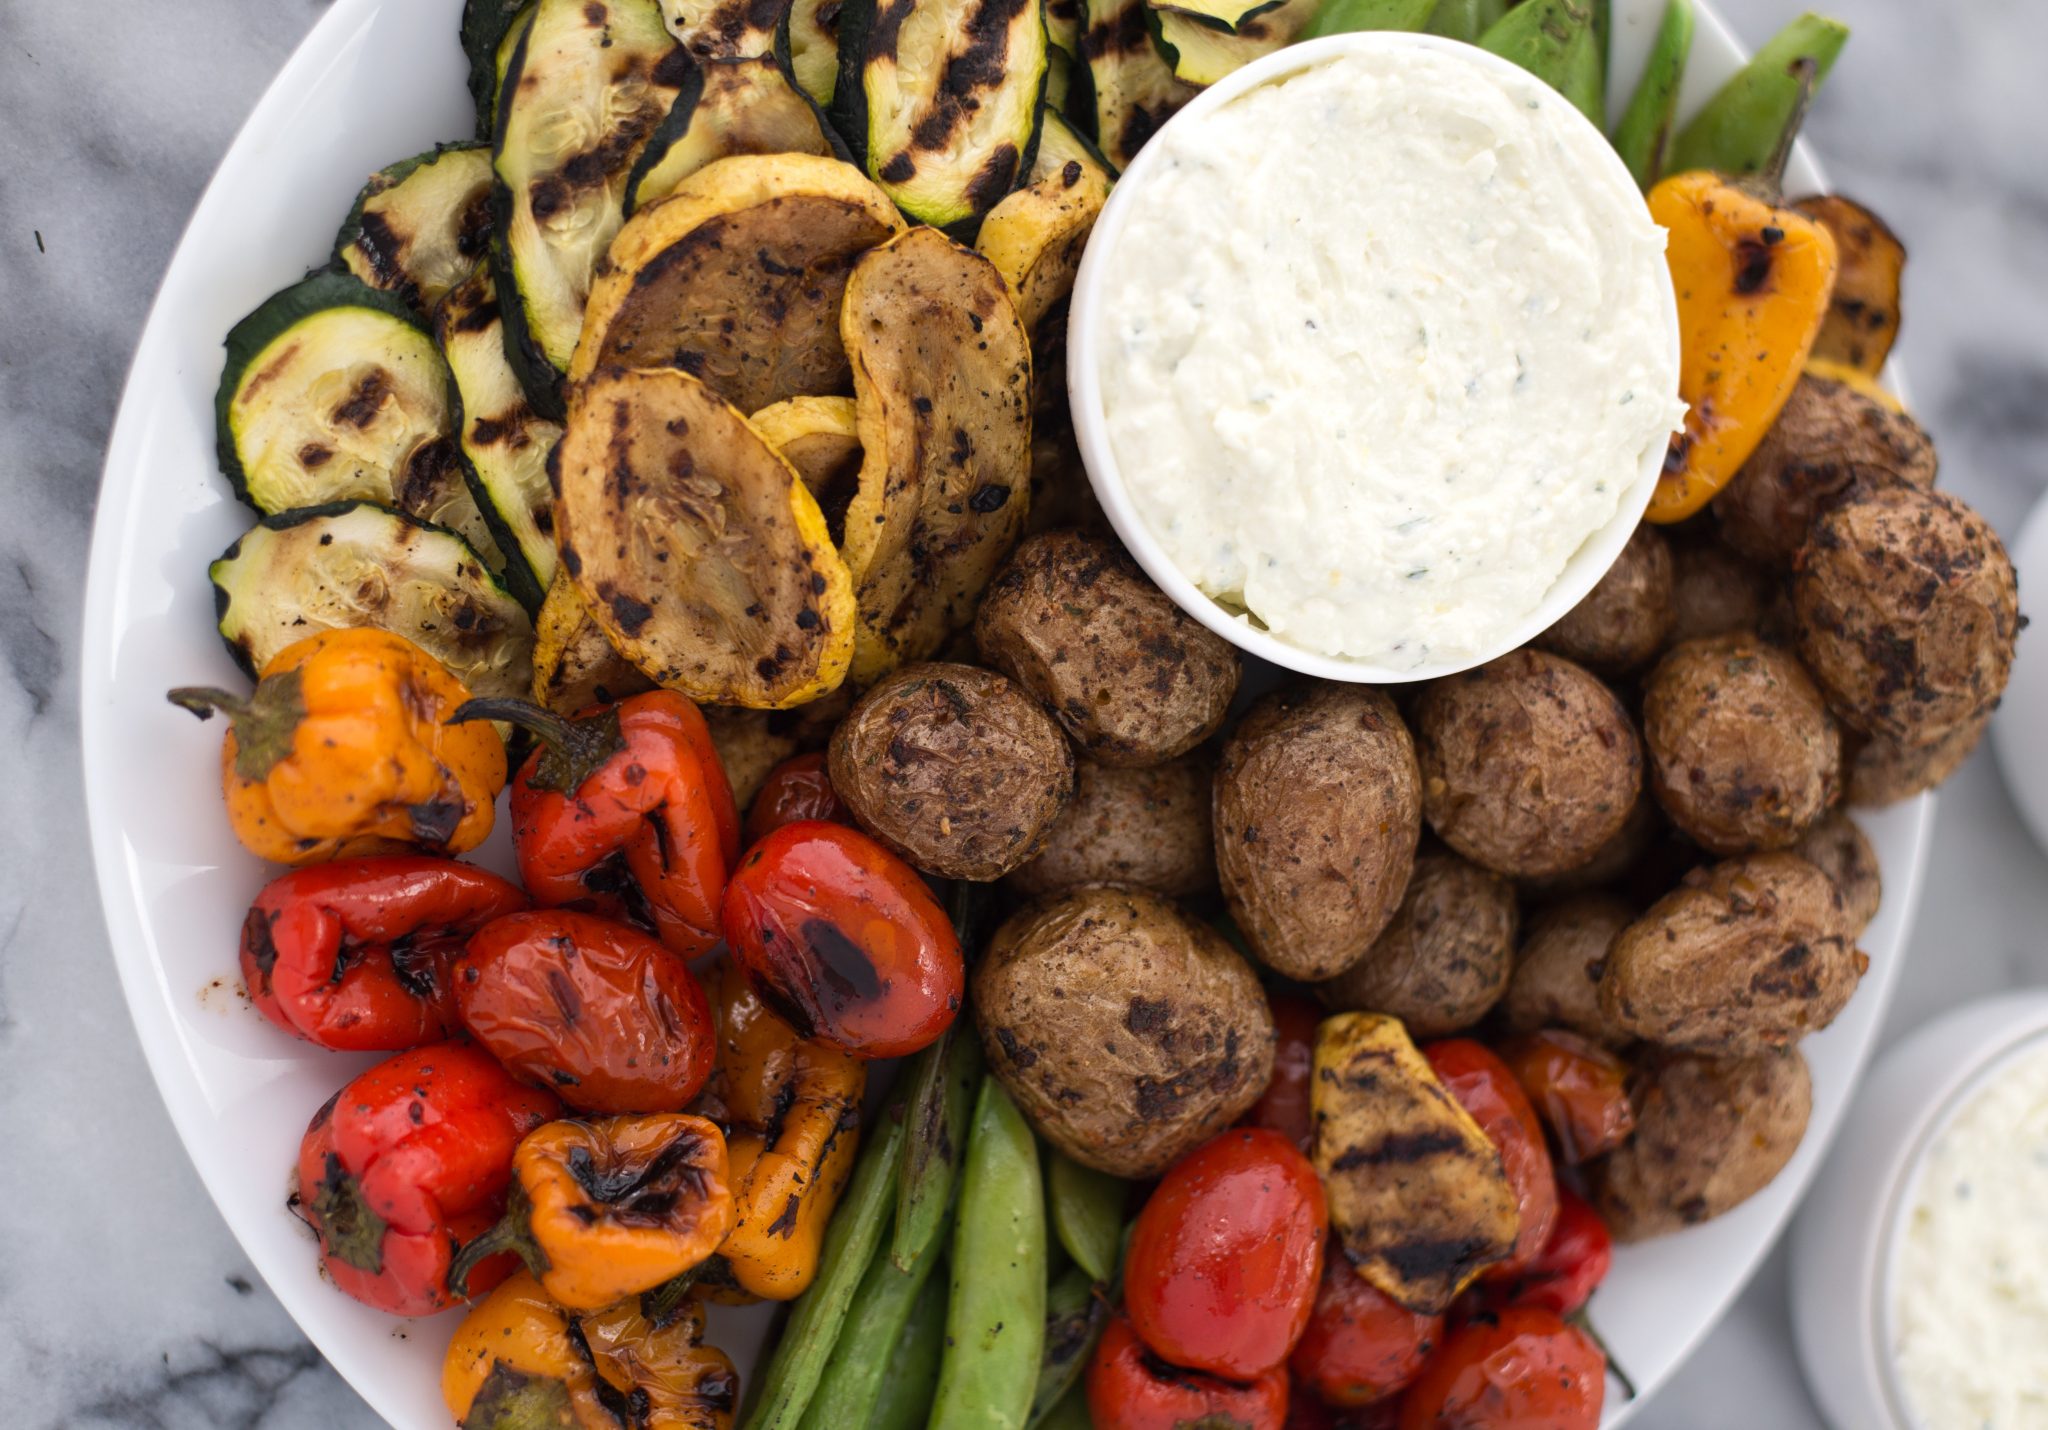 A platter of grilled veggies with some lemon feta dip